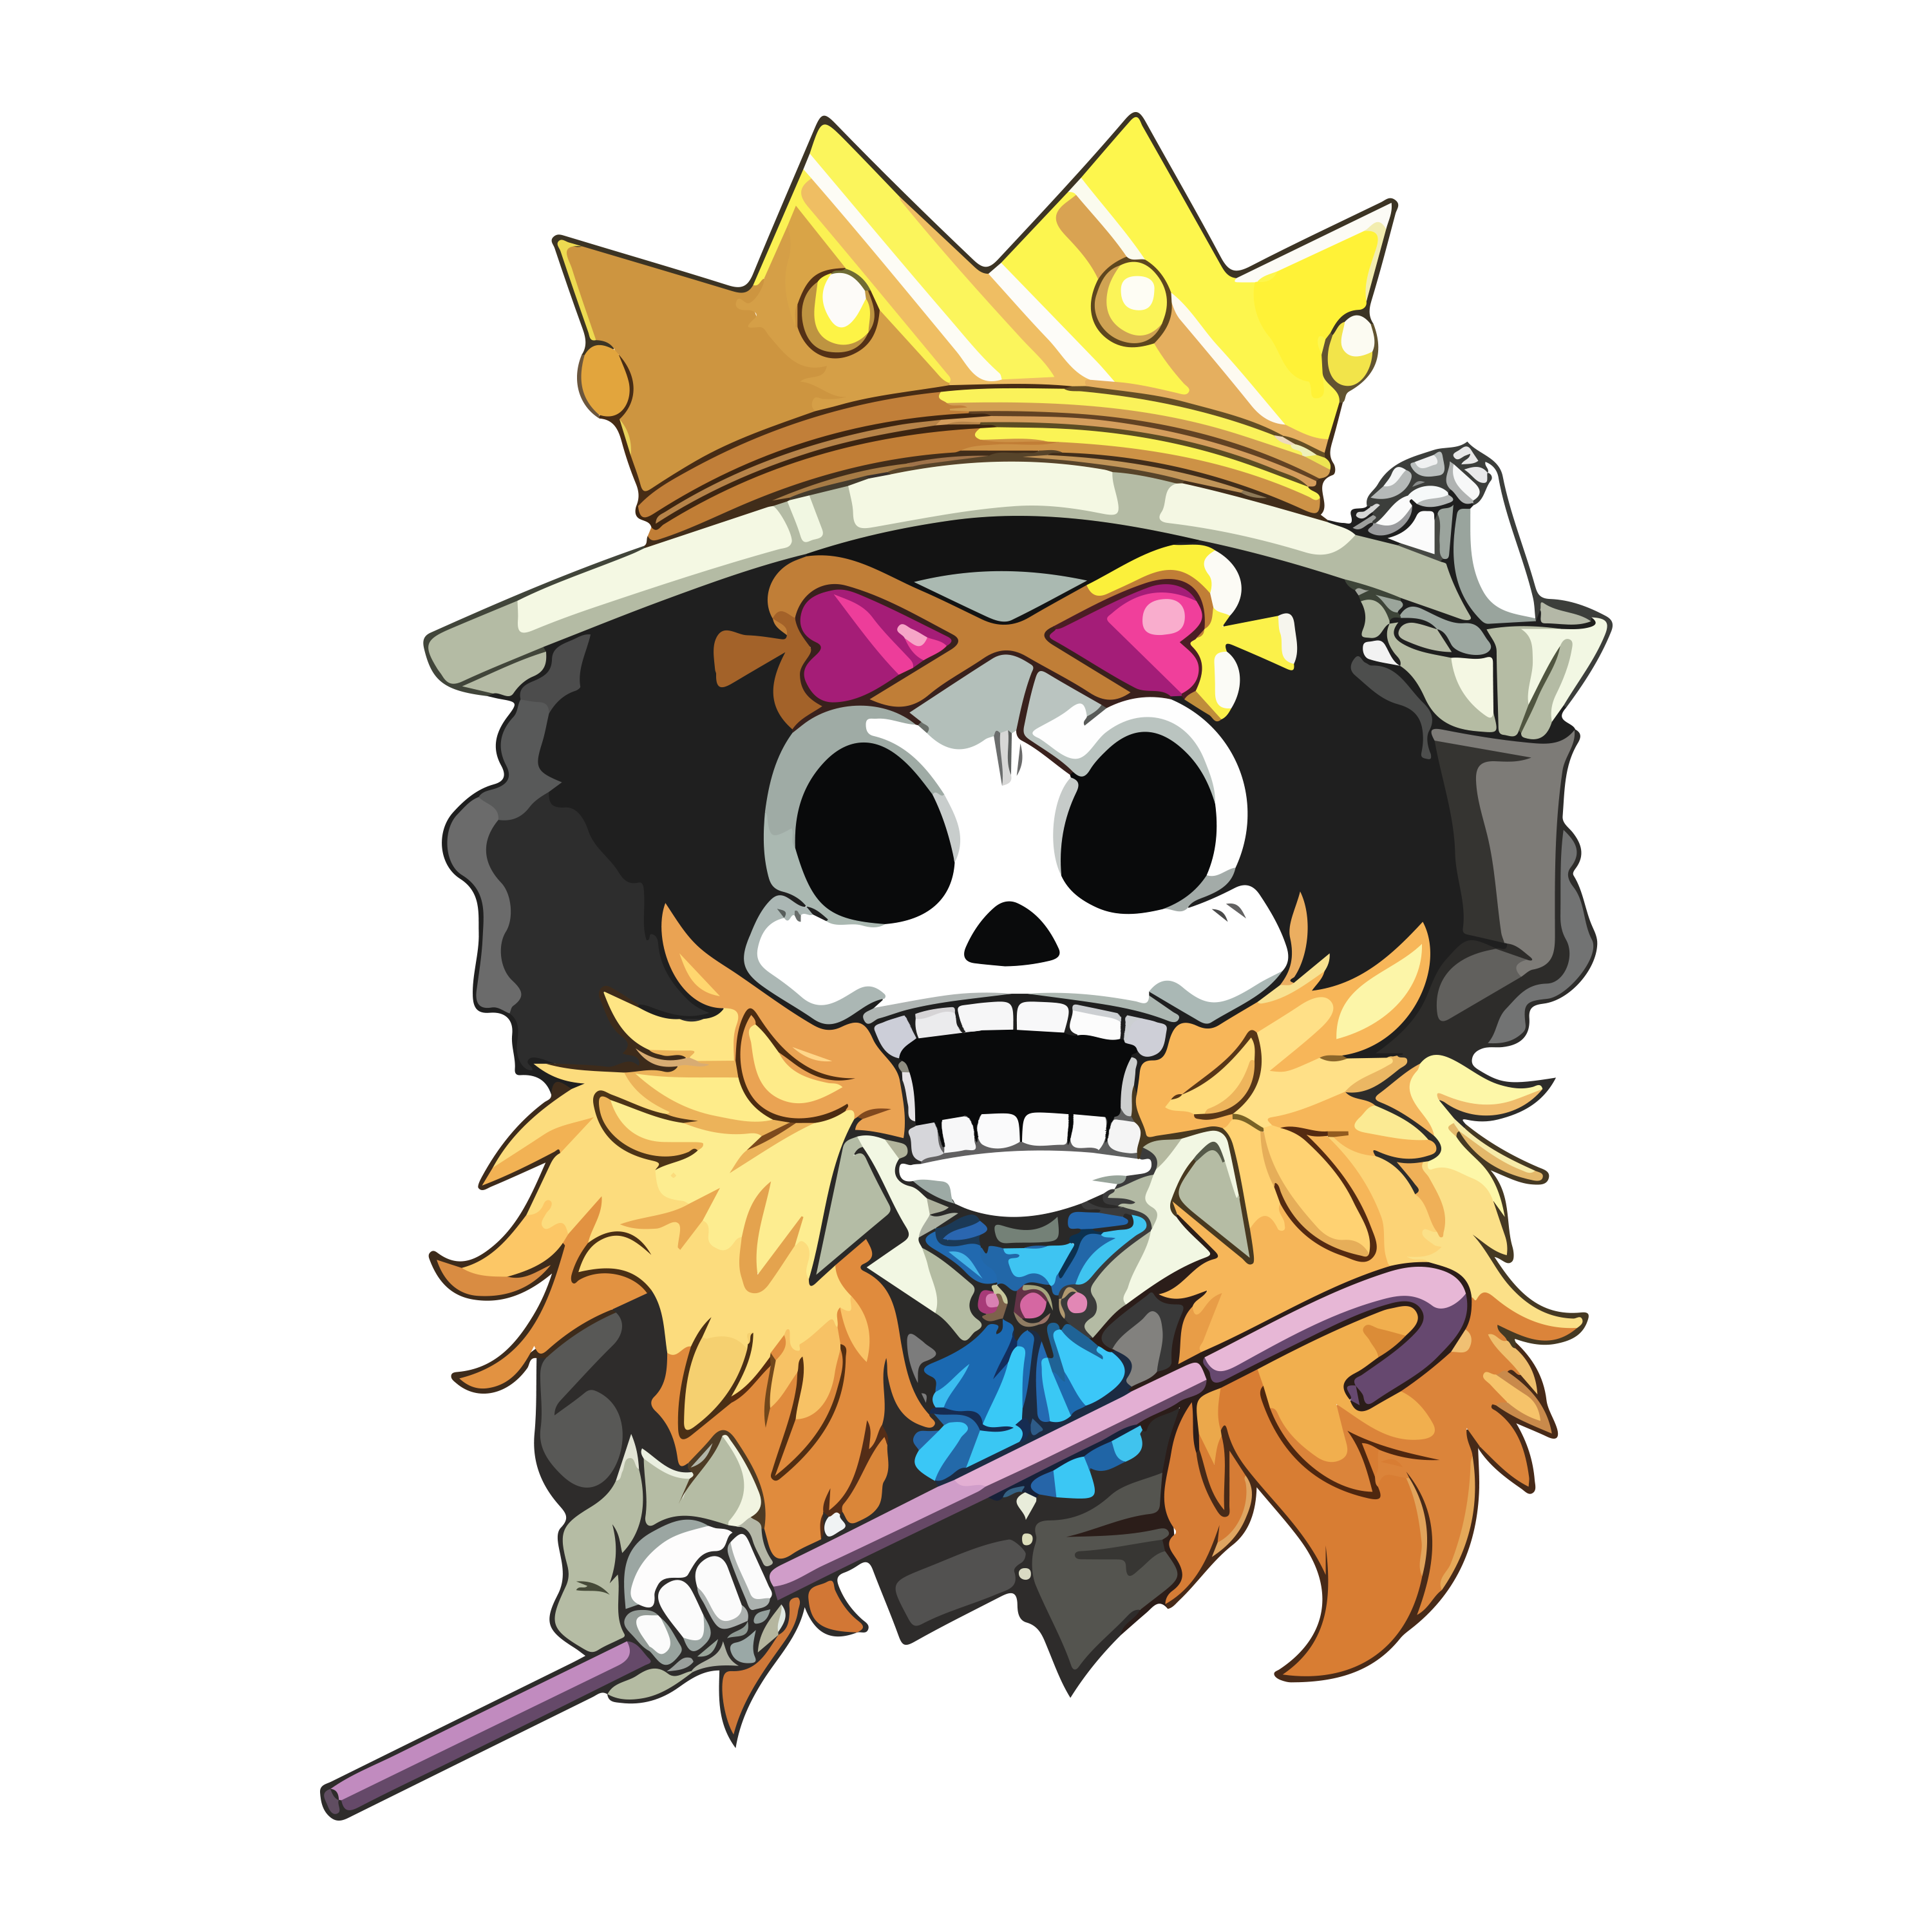 One Piece Brook Soul King T Shirts, Sweaters, Phone Cases Stickers And More. #onepiece #brook #soulking #soul #music #kawaii #cute #chibi #funny #c